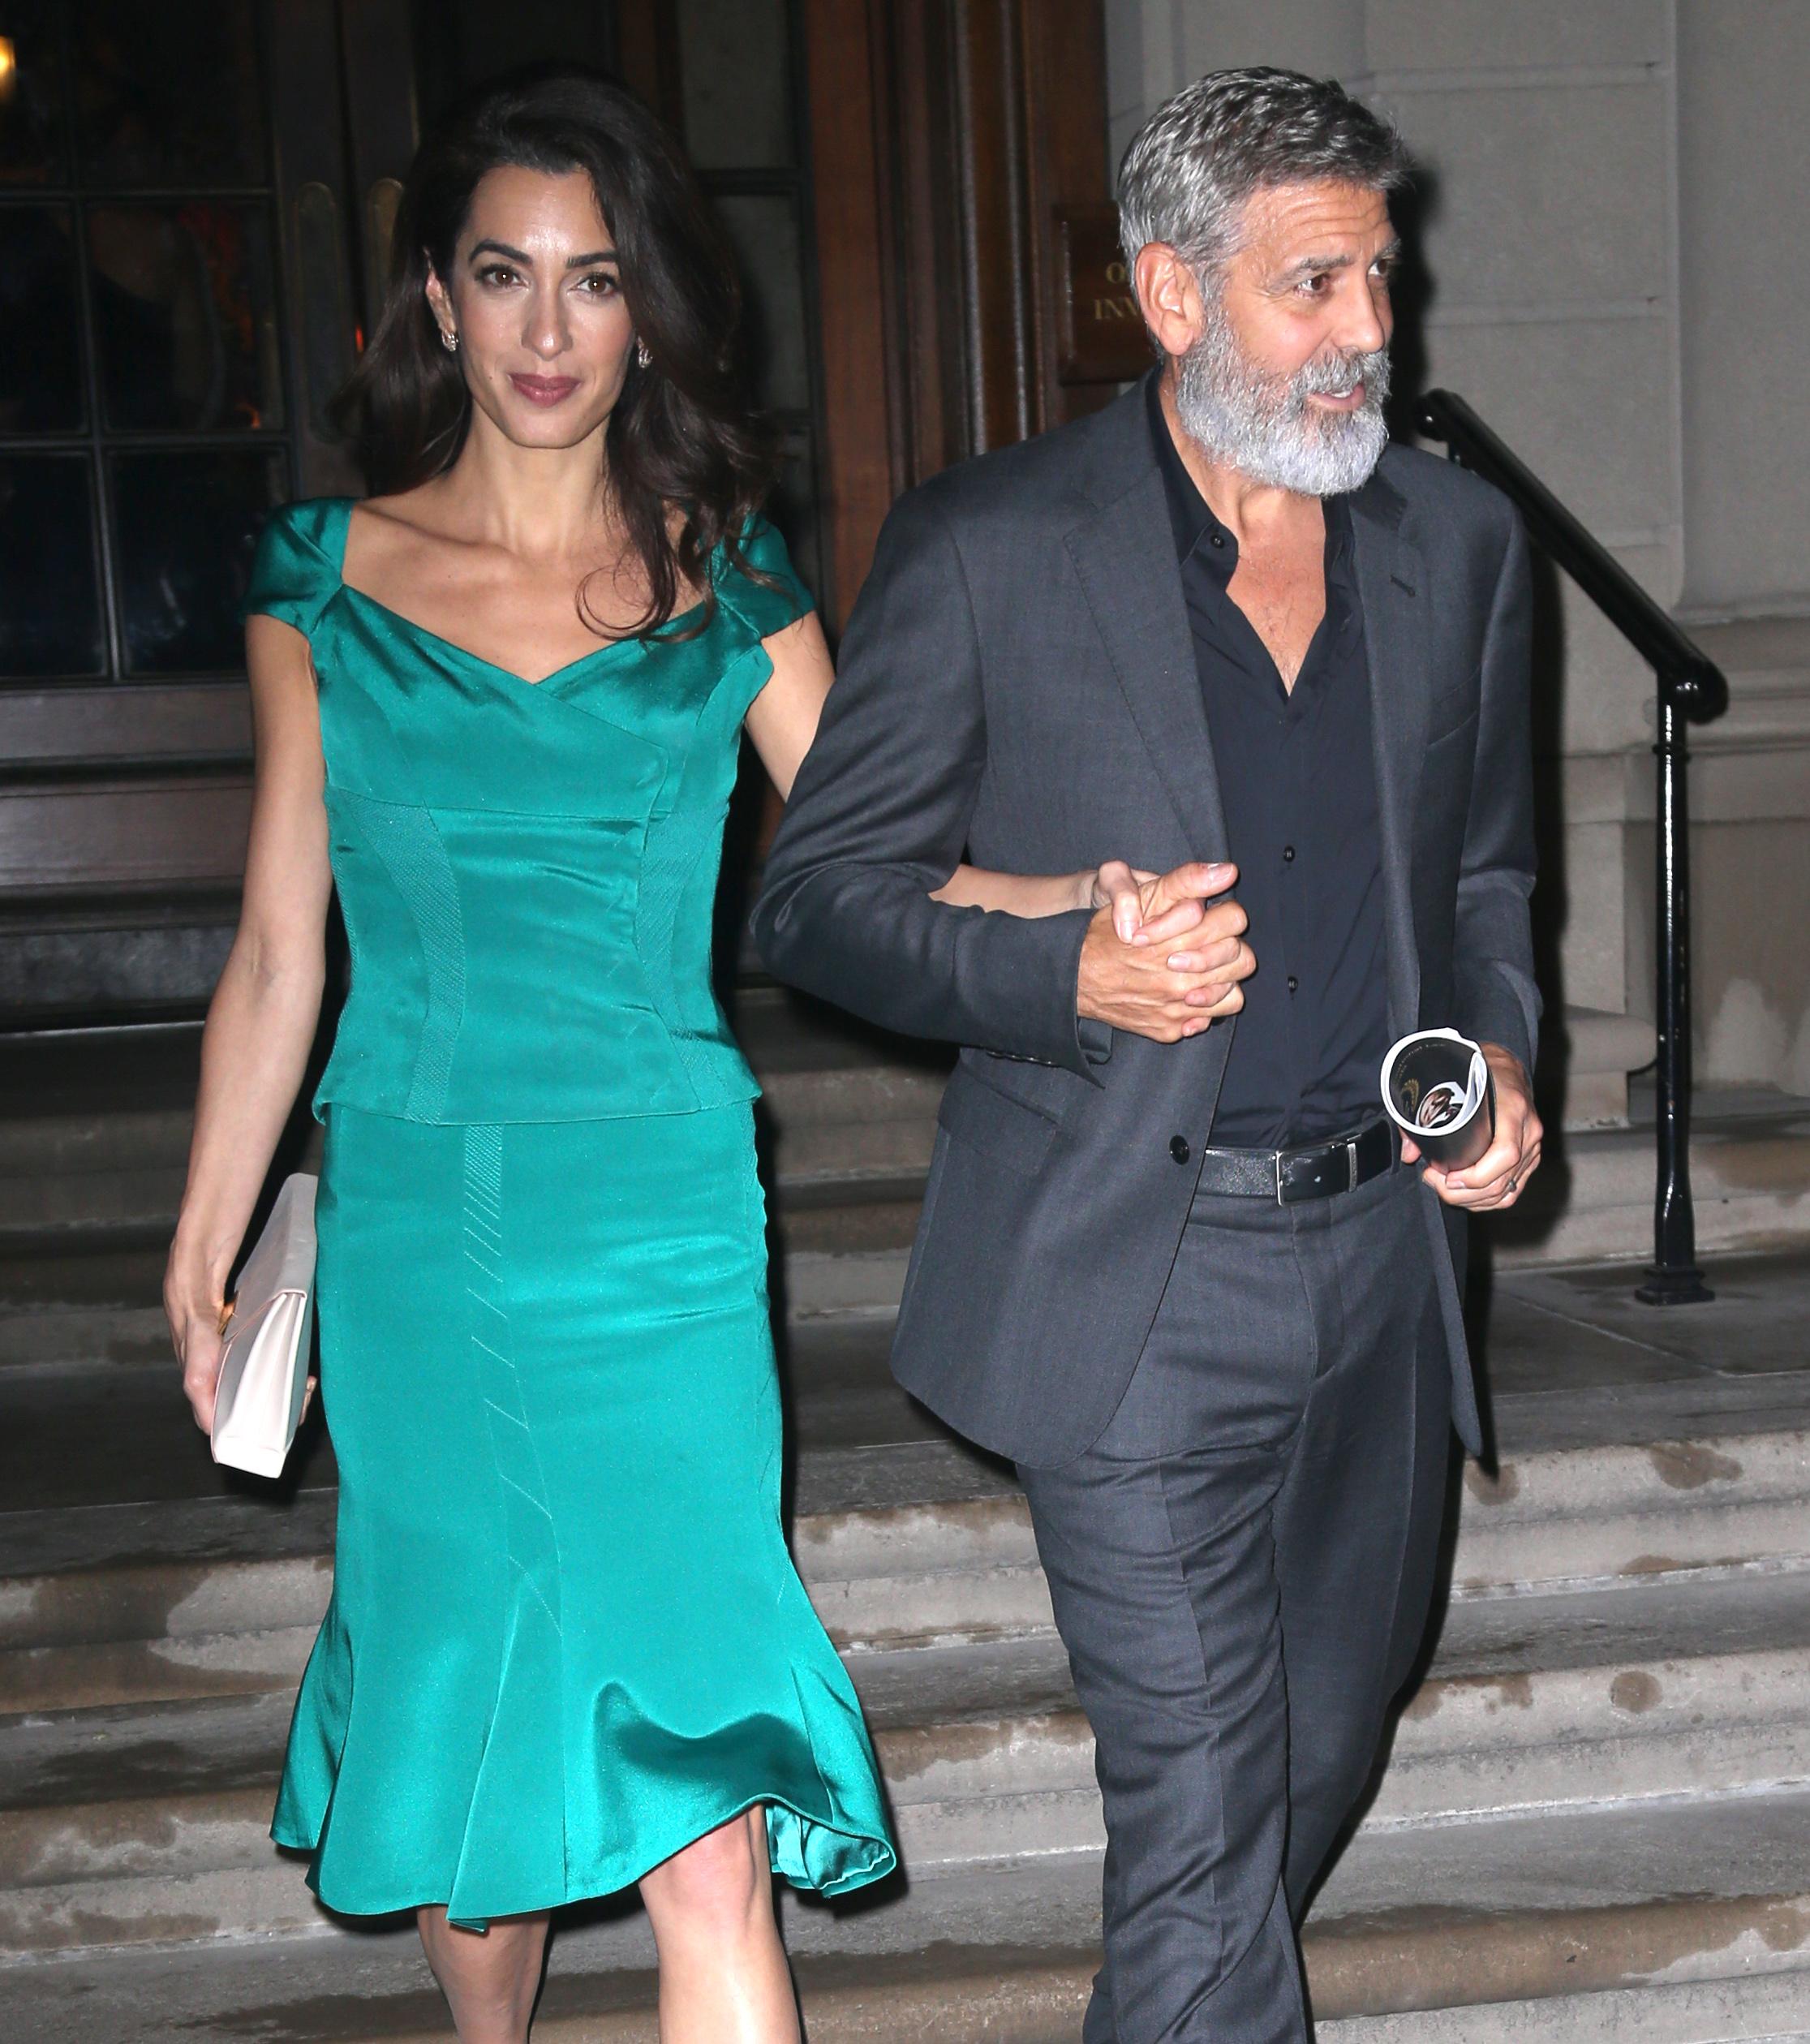 George Clooney & Amal Clooney out and about in New York City